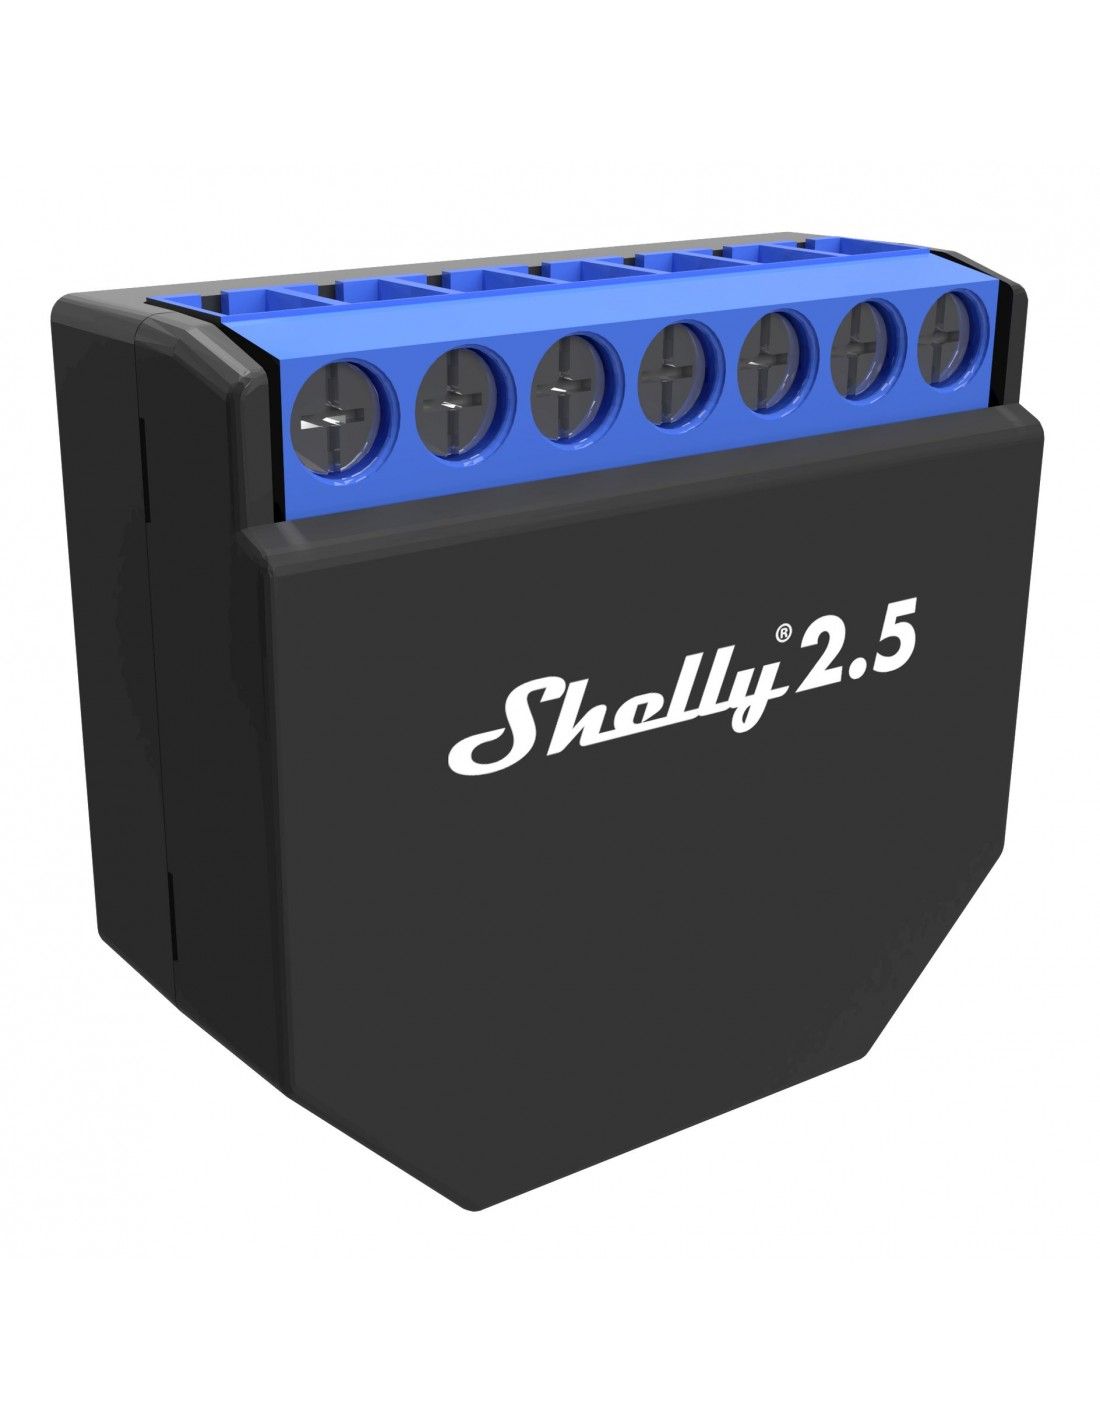 https://shop.swiss-domotique.ch/4143-thickbox_default/shelly-2-circuit-wifi-relay-switch-shelly-25.jpg